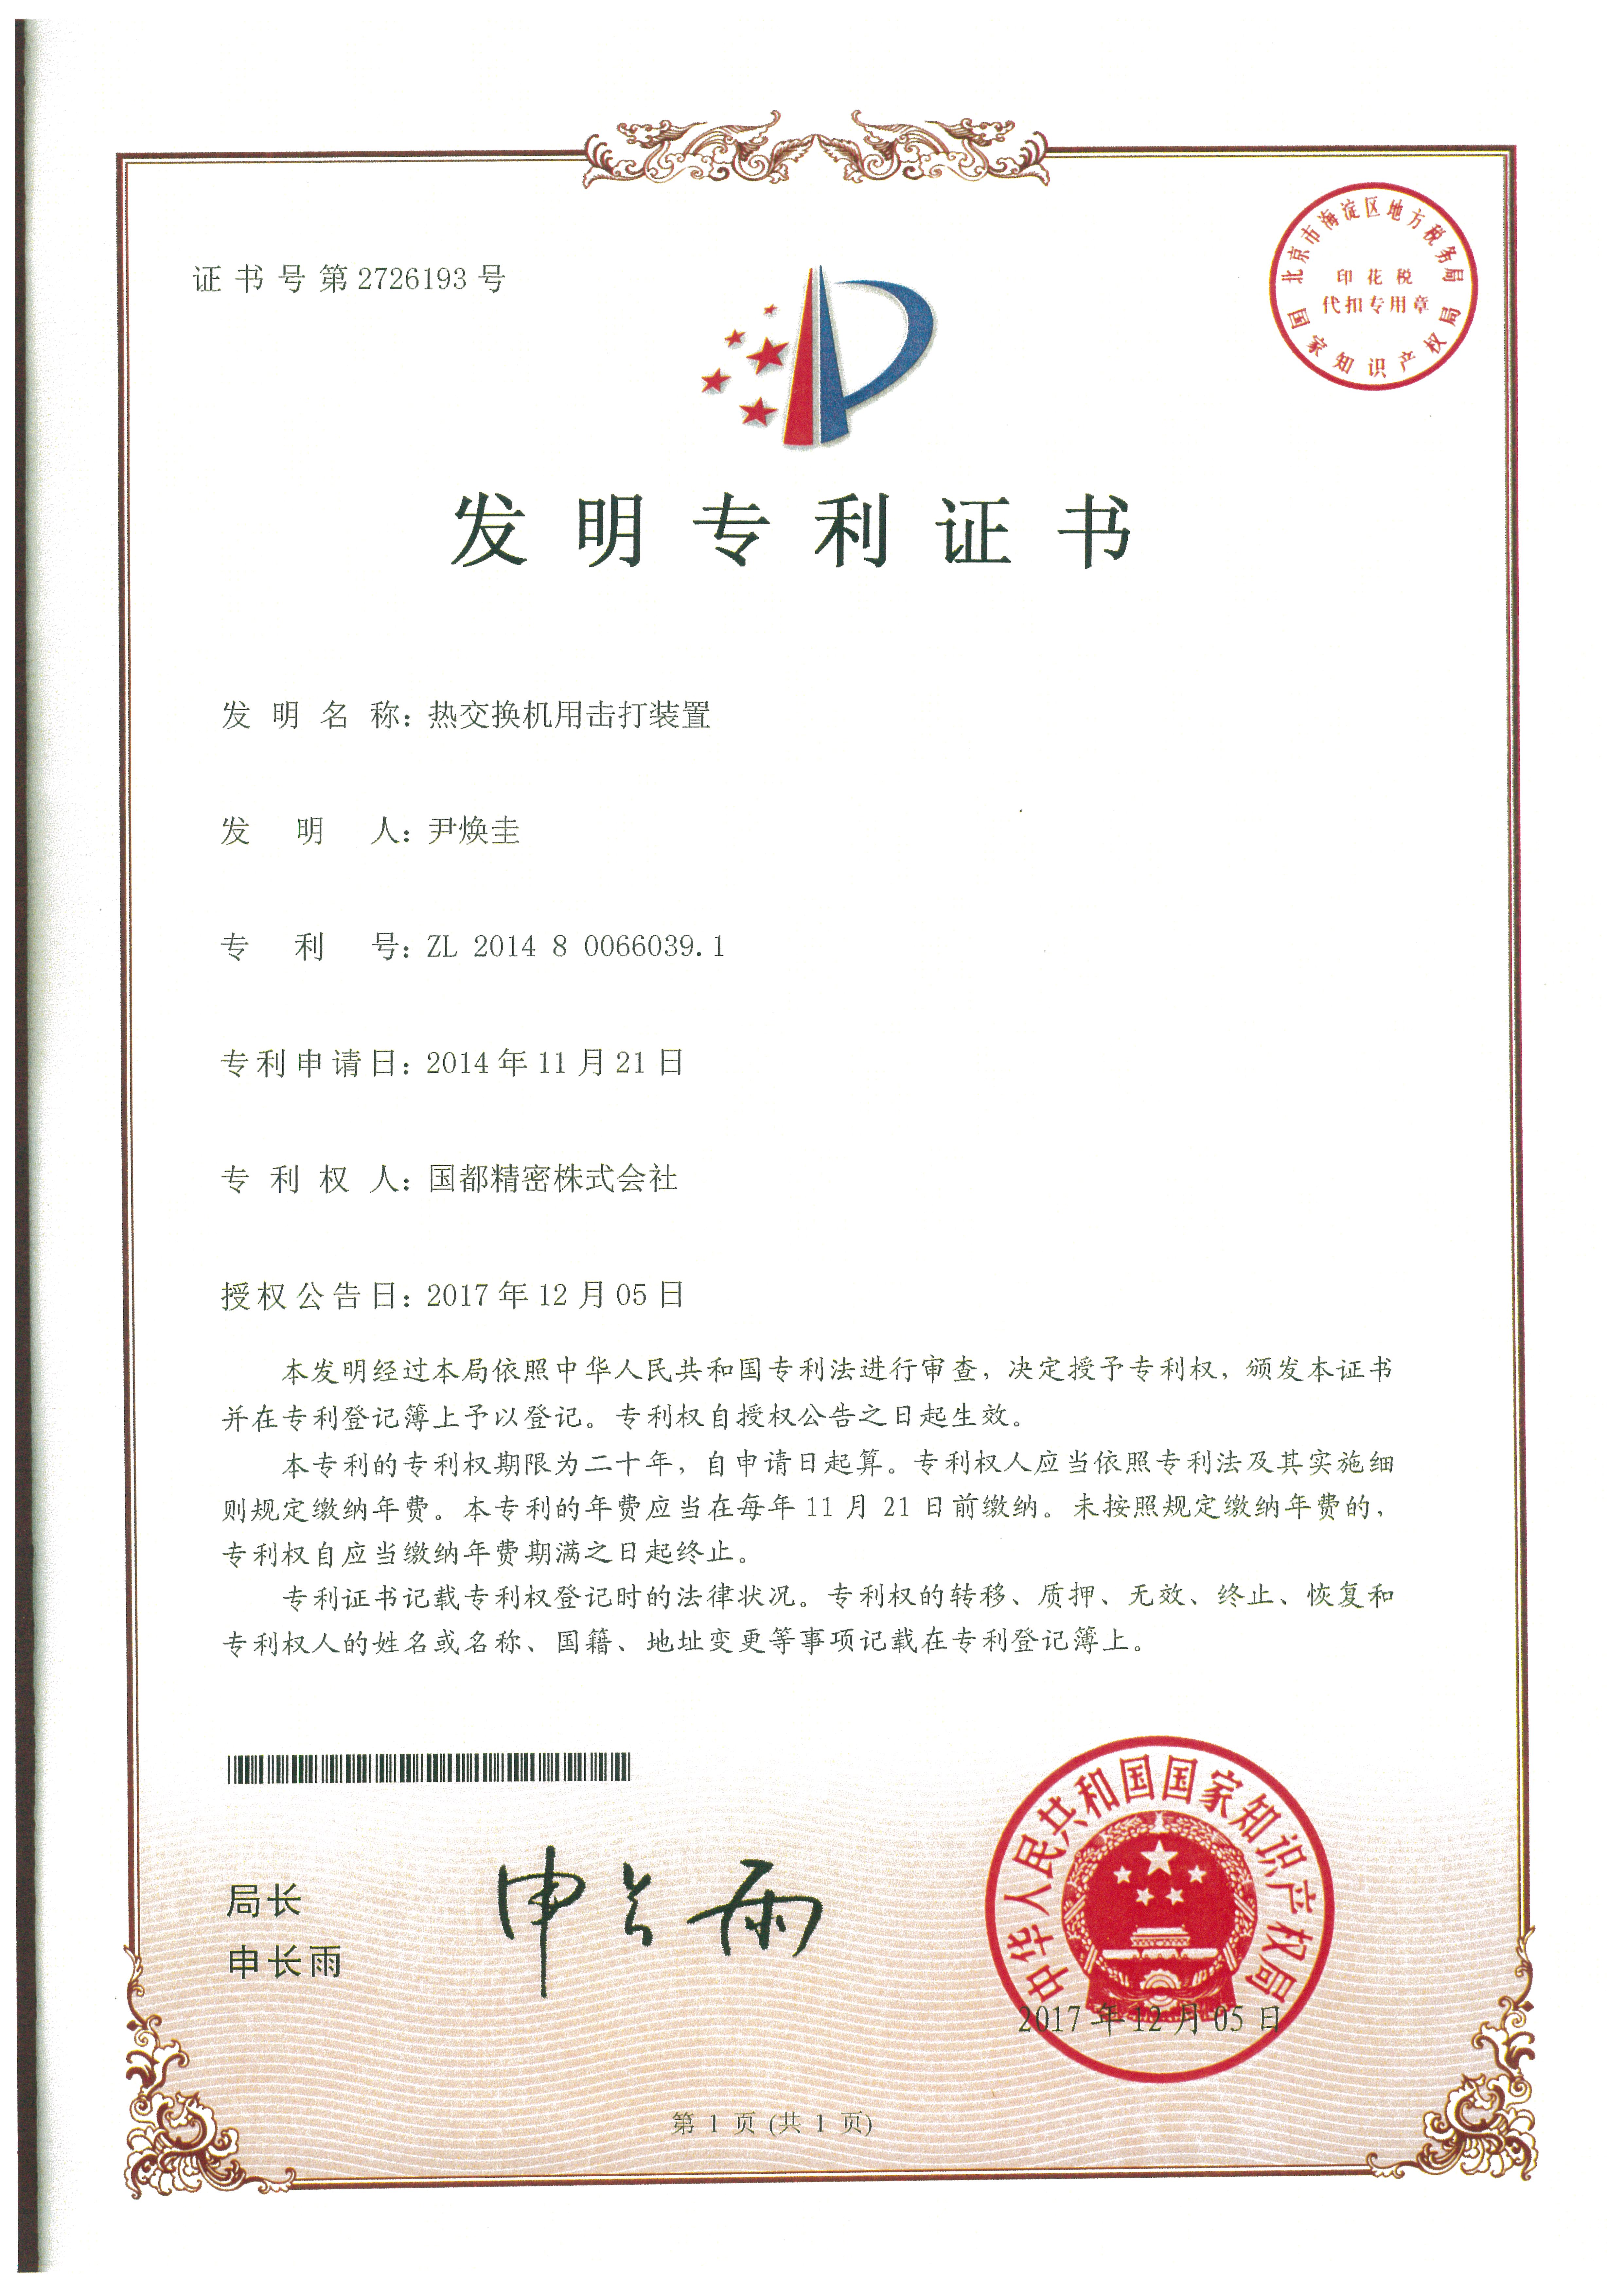 Chinese Certificate of Patent1